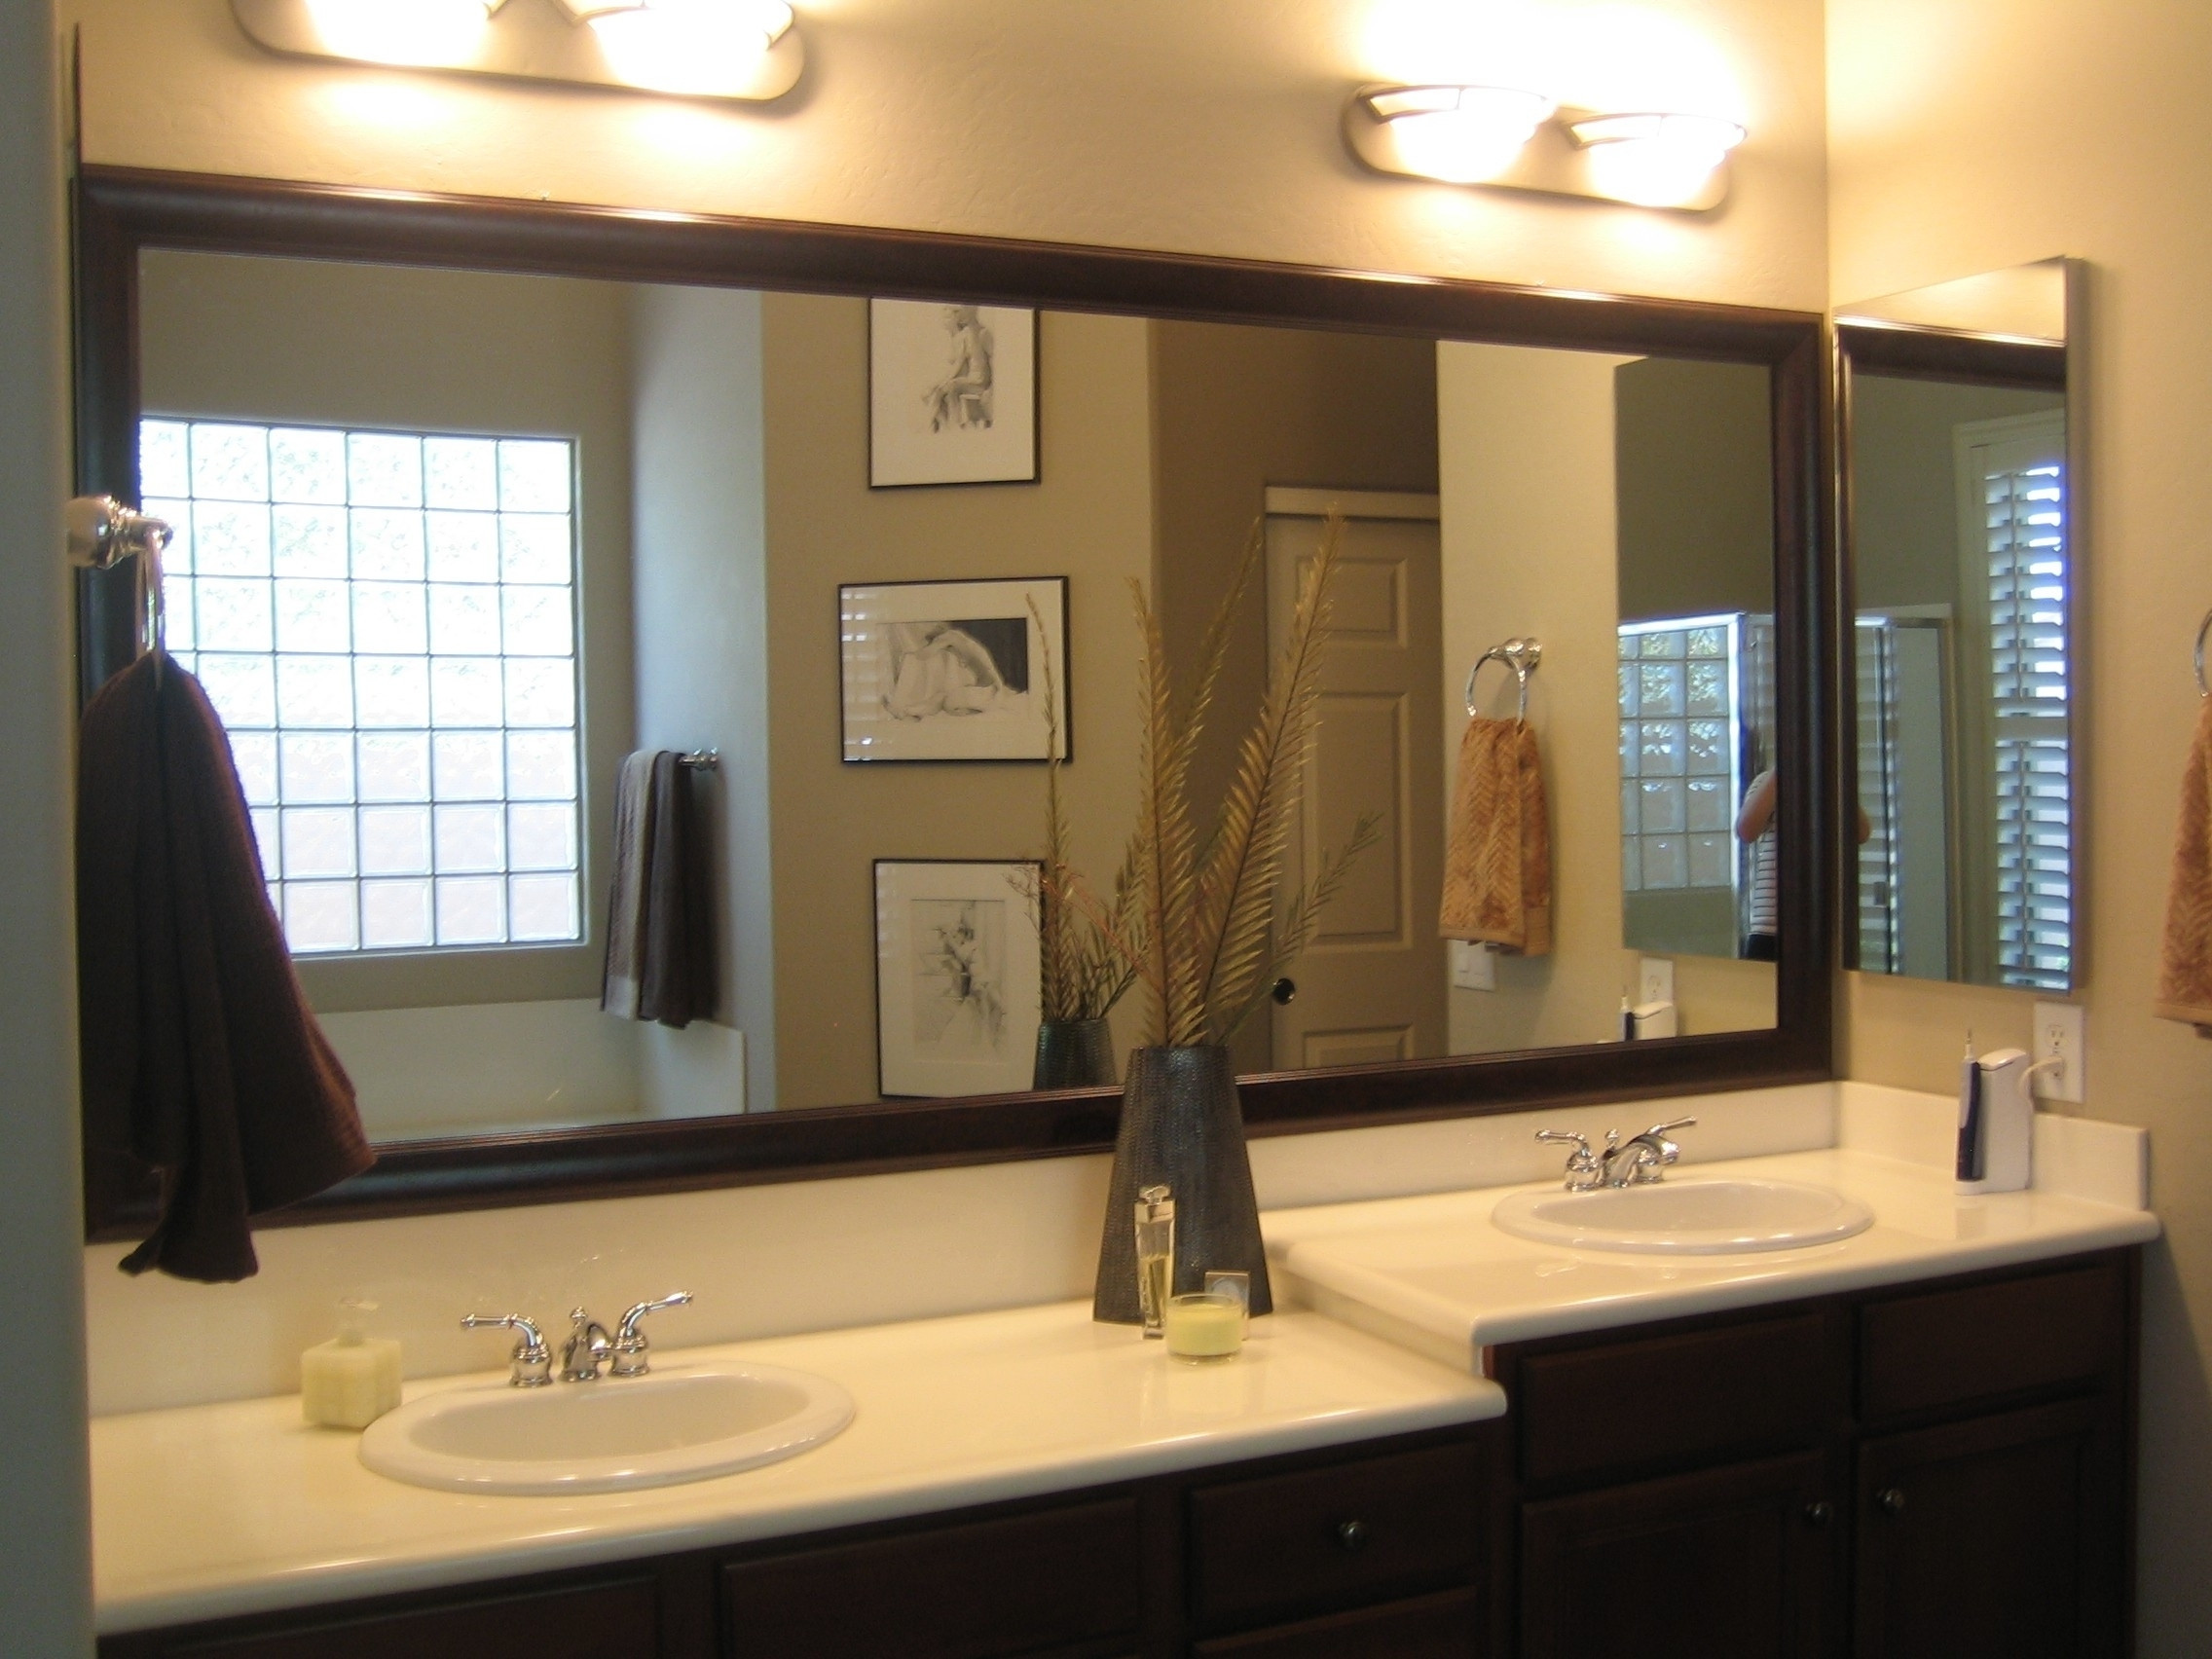 Large Framed Mirrors For Bathroom
 Bathroom mirrors separate or one big piece of glass